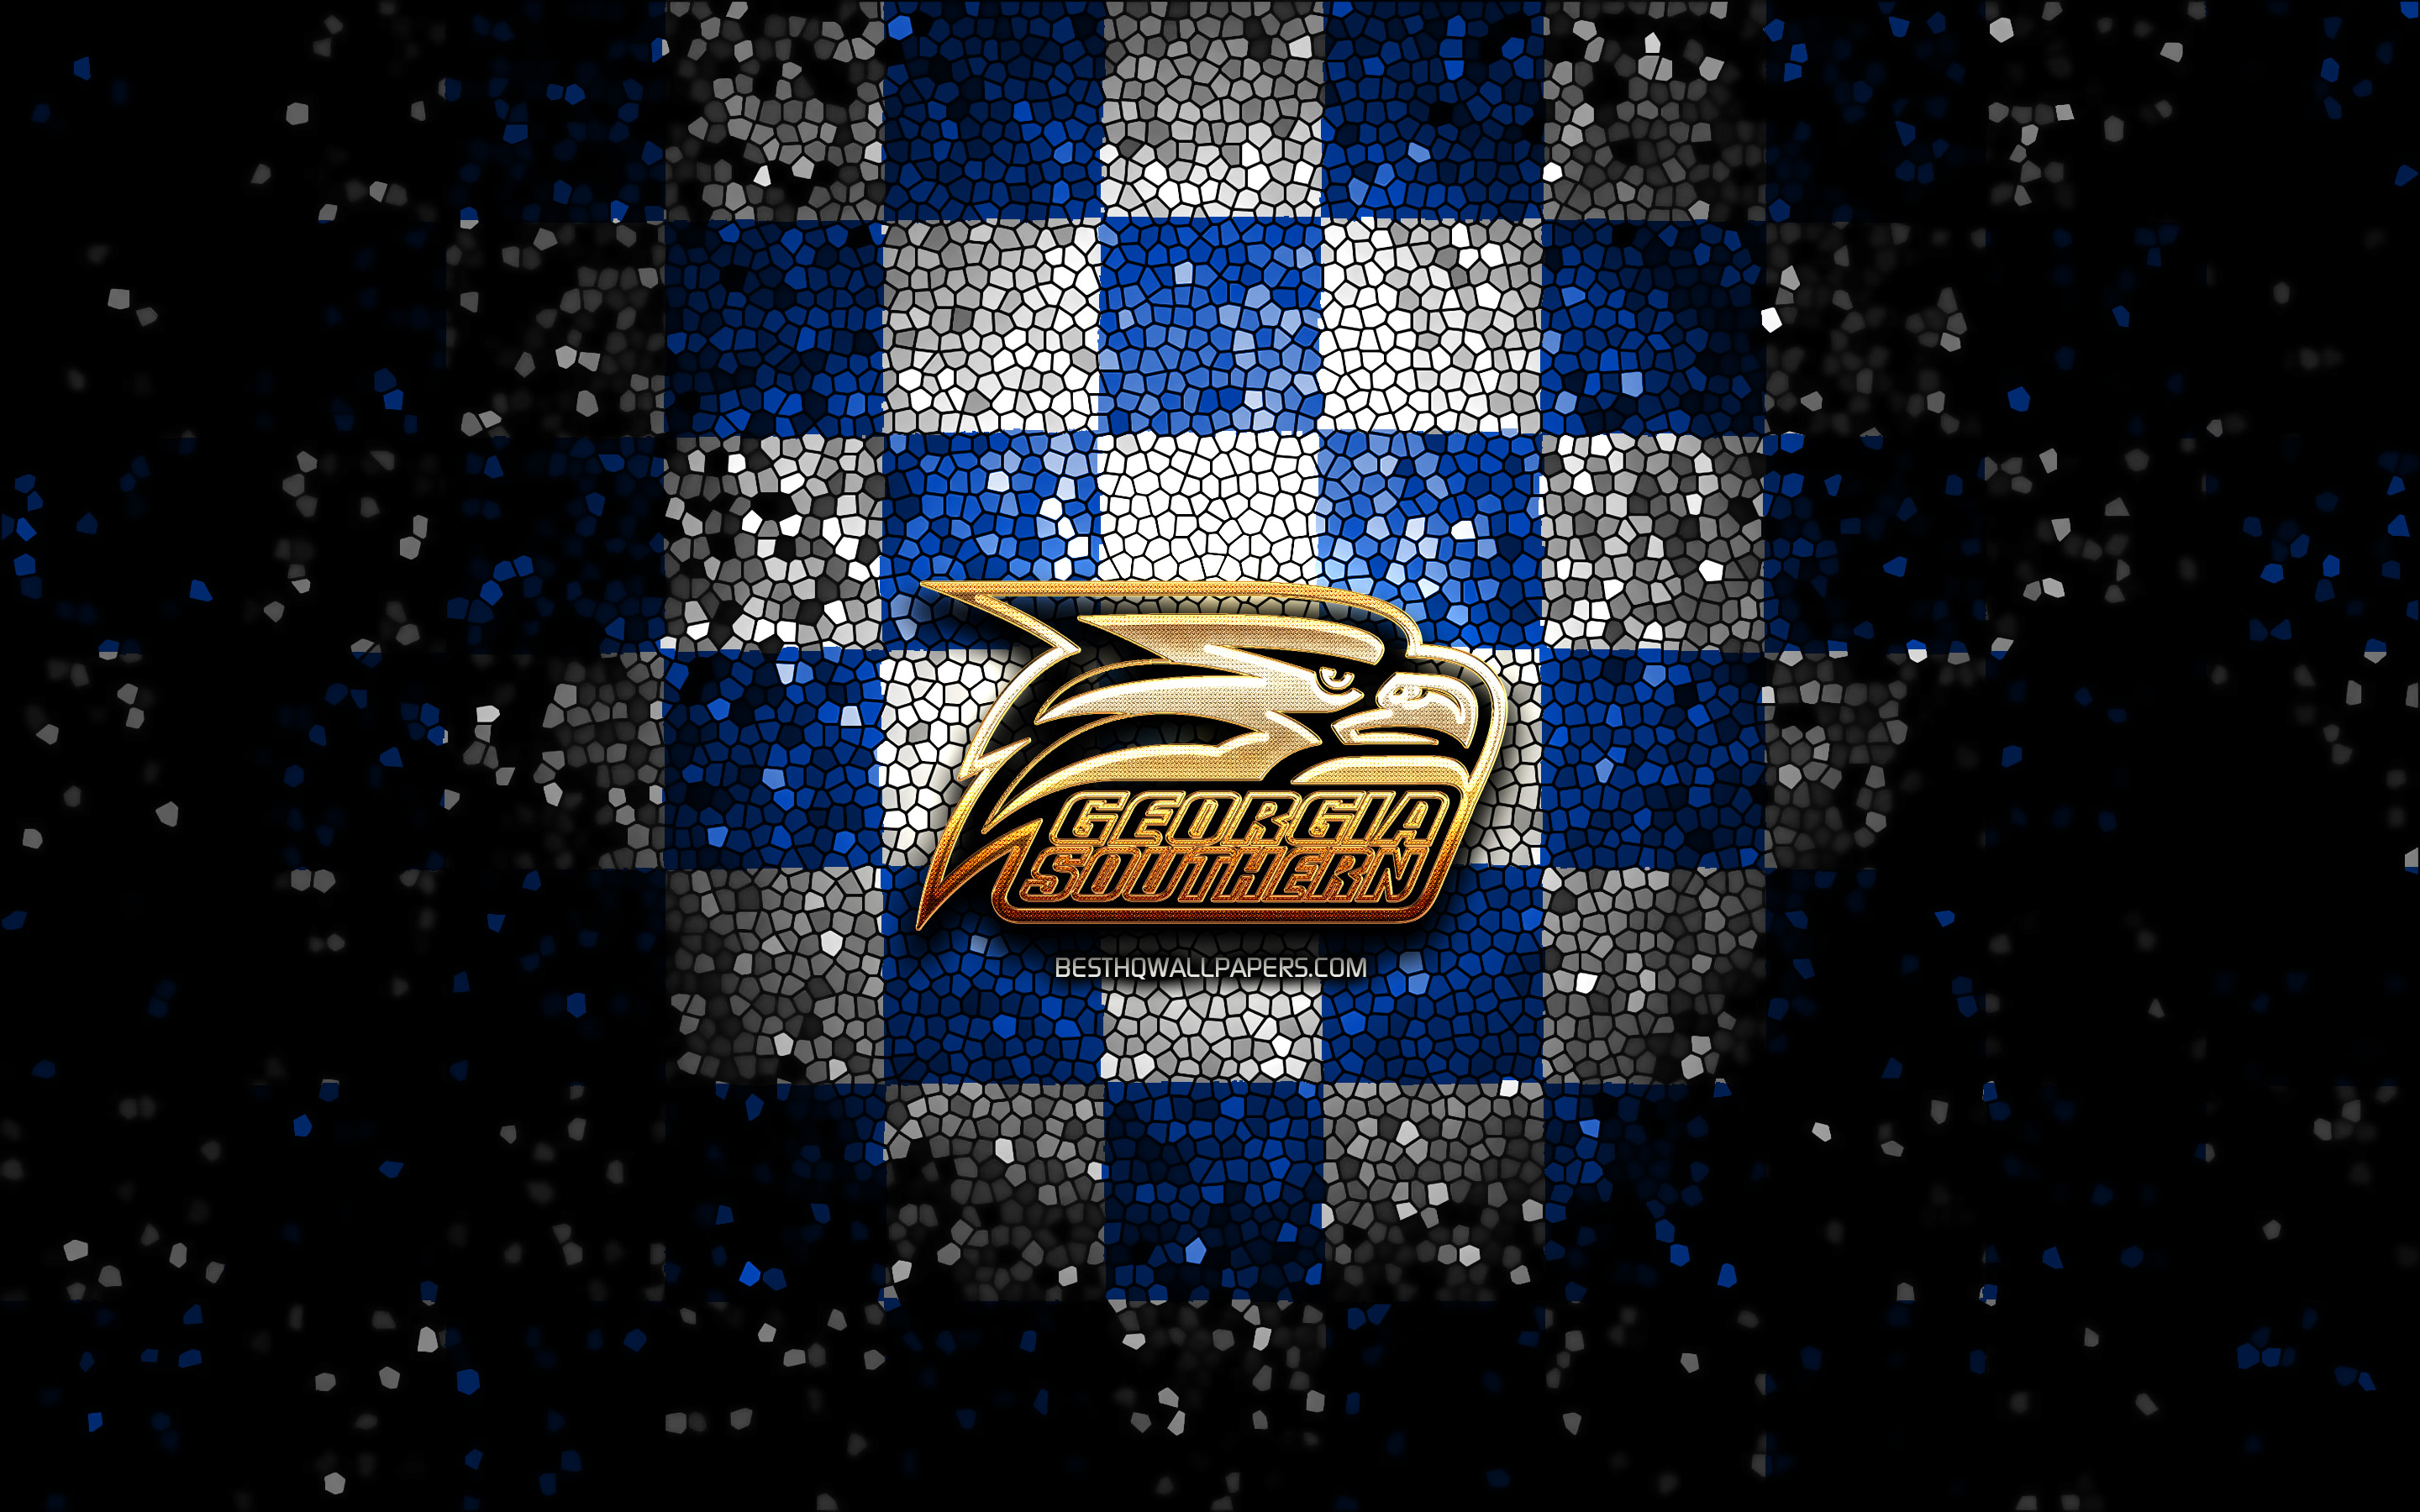 Download wallpaper Georgia Southern Eagles, glitter logo, NCAA, blue white checkered background, USA, american football team, Georgia Southern Eagles logo, mosaic art, american football, America for desktop with resolution 2880x1800. High Quality